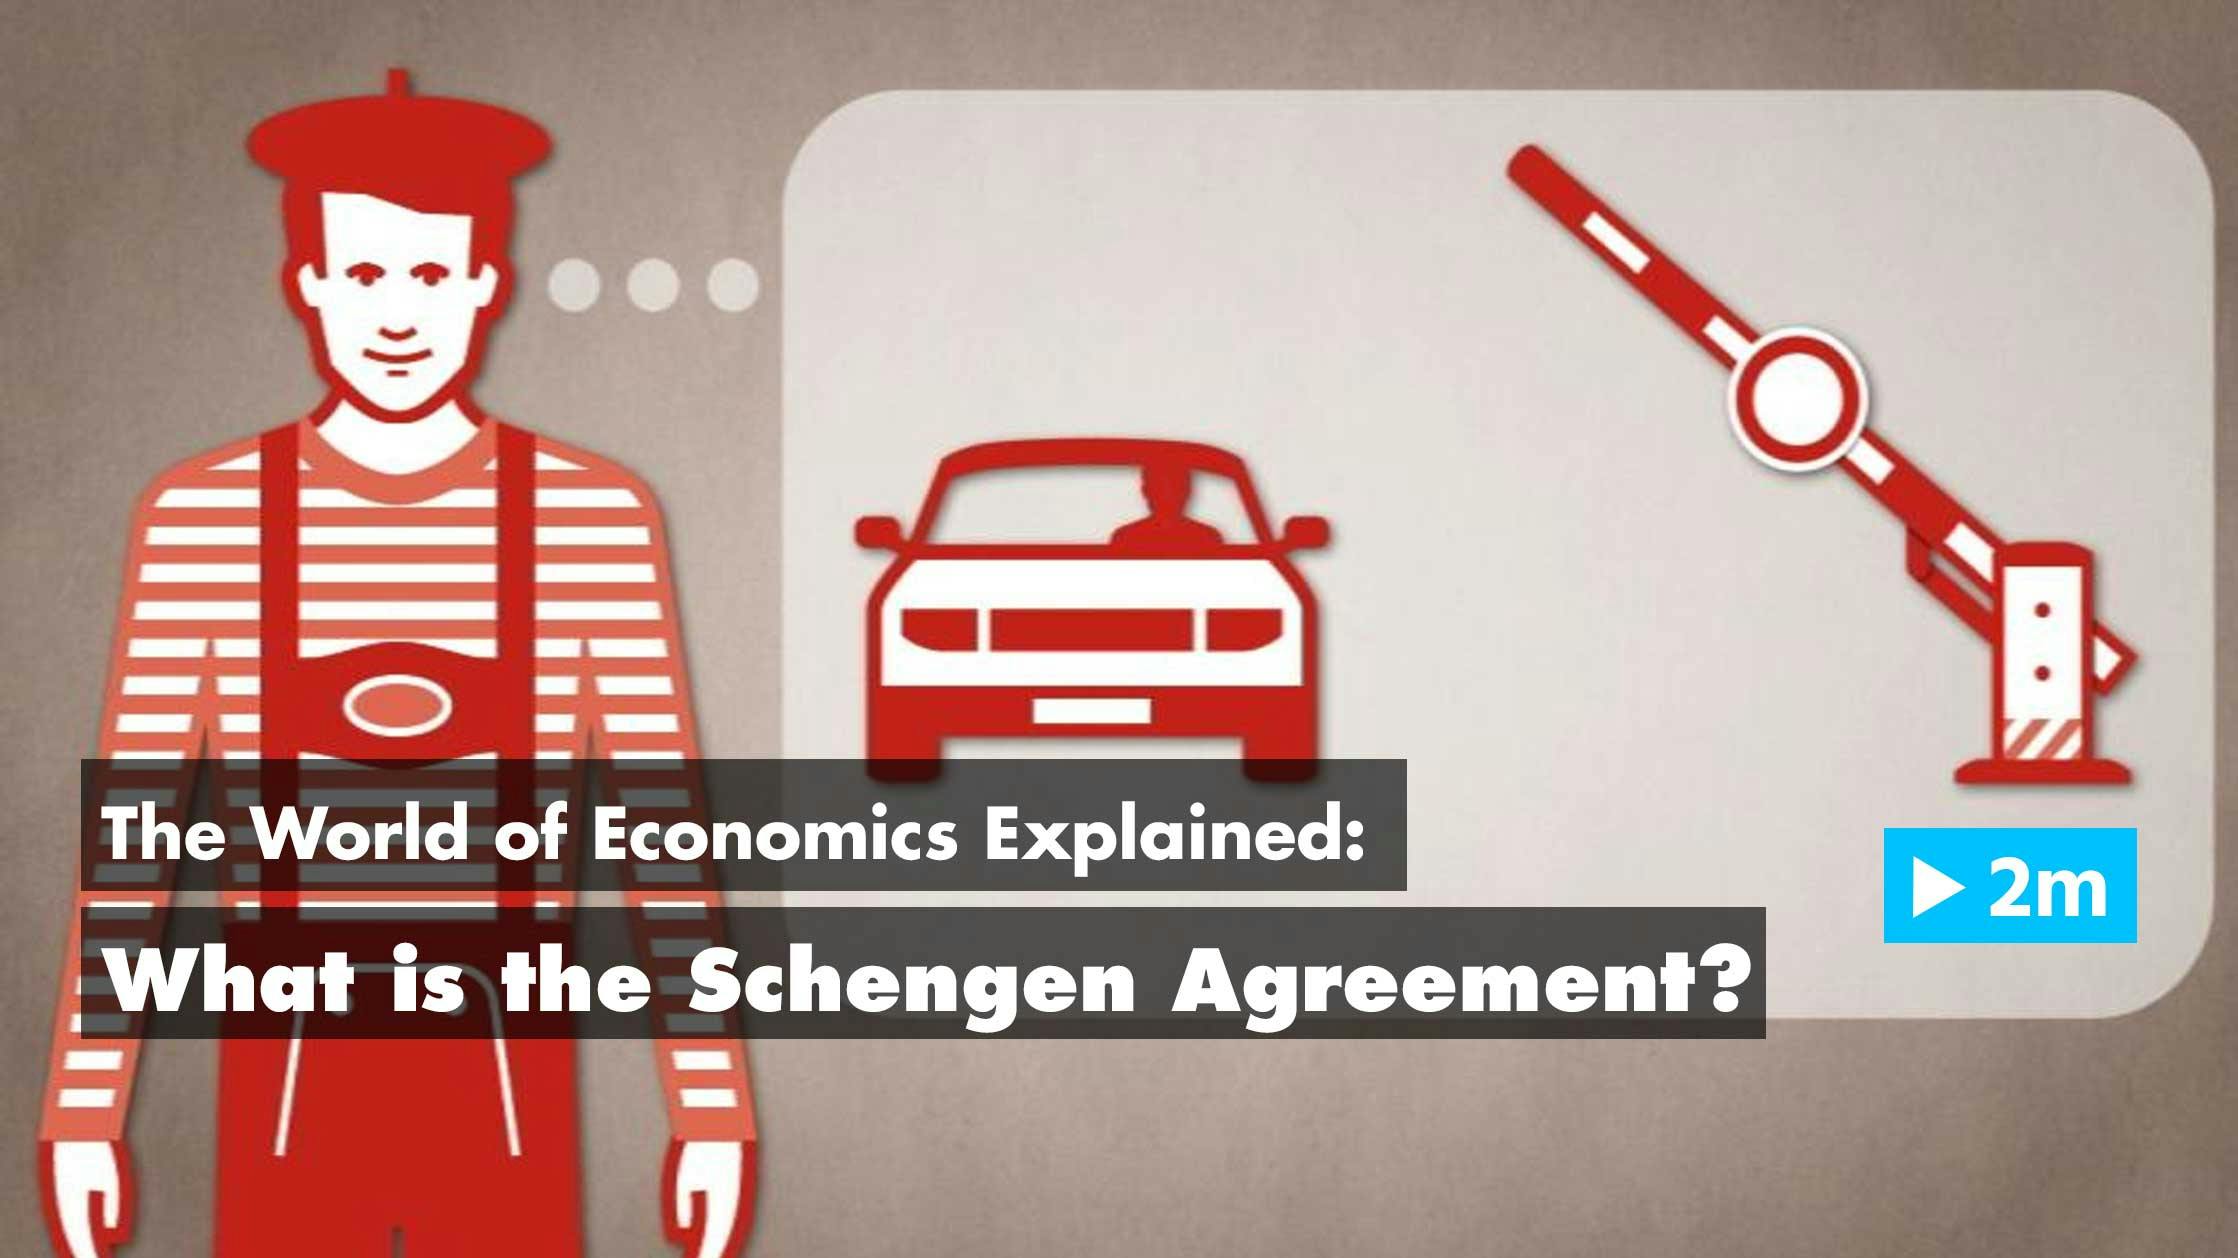 The World of Economics Explained: What is the Schengen Agreement?